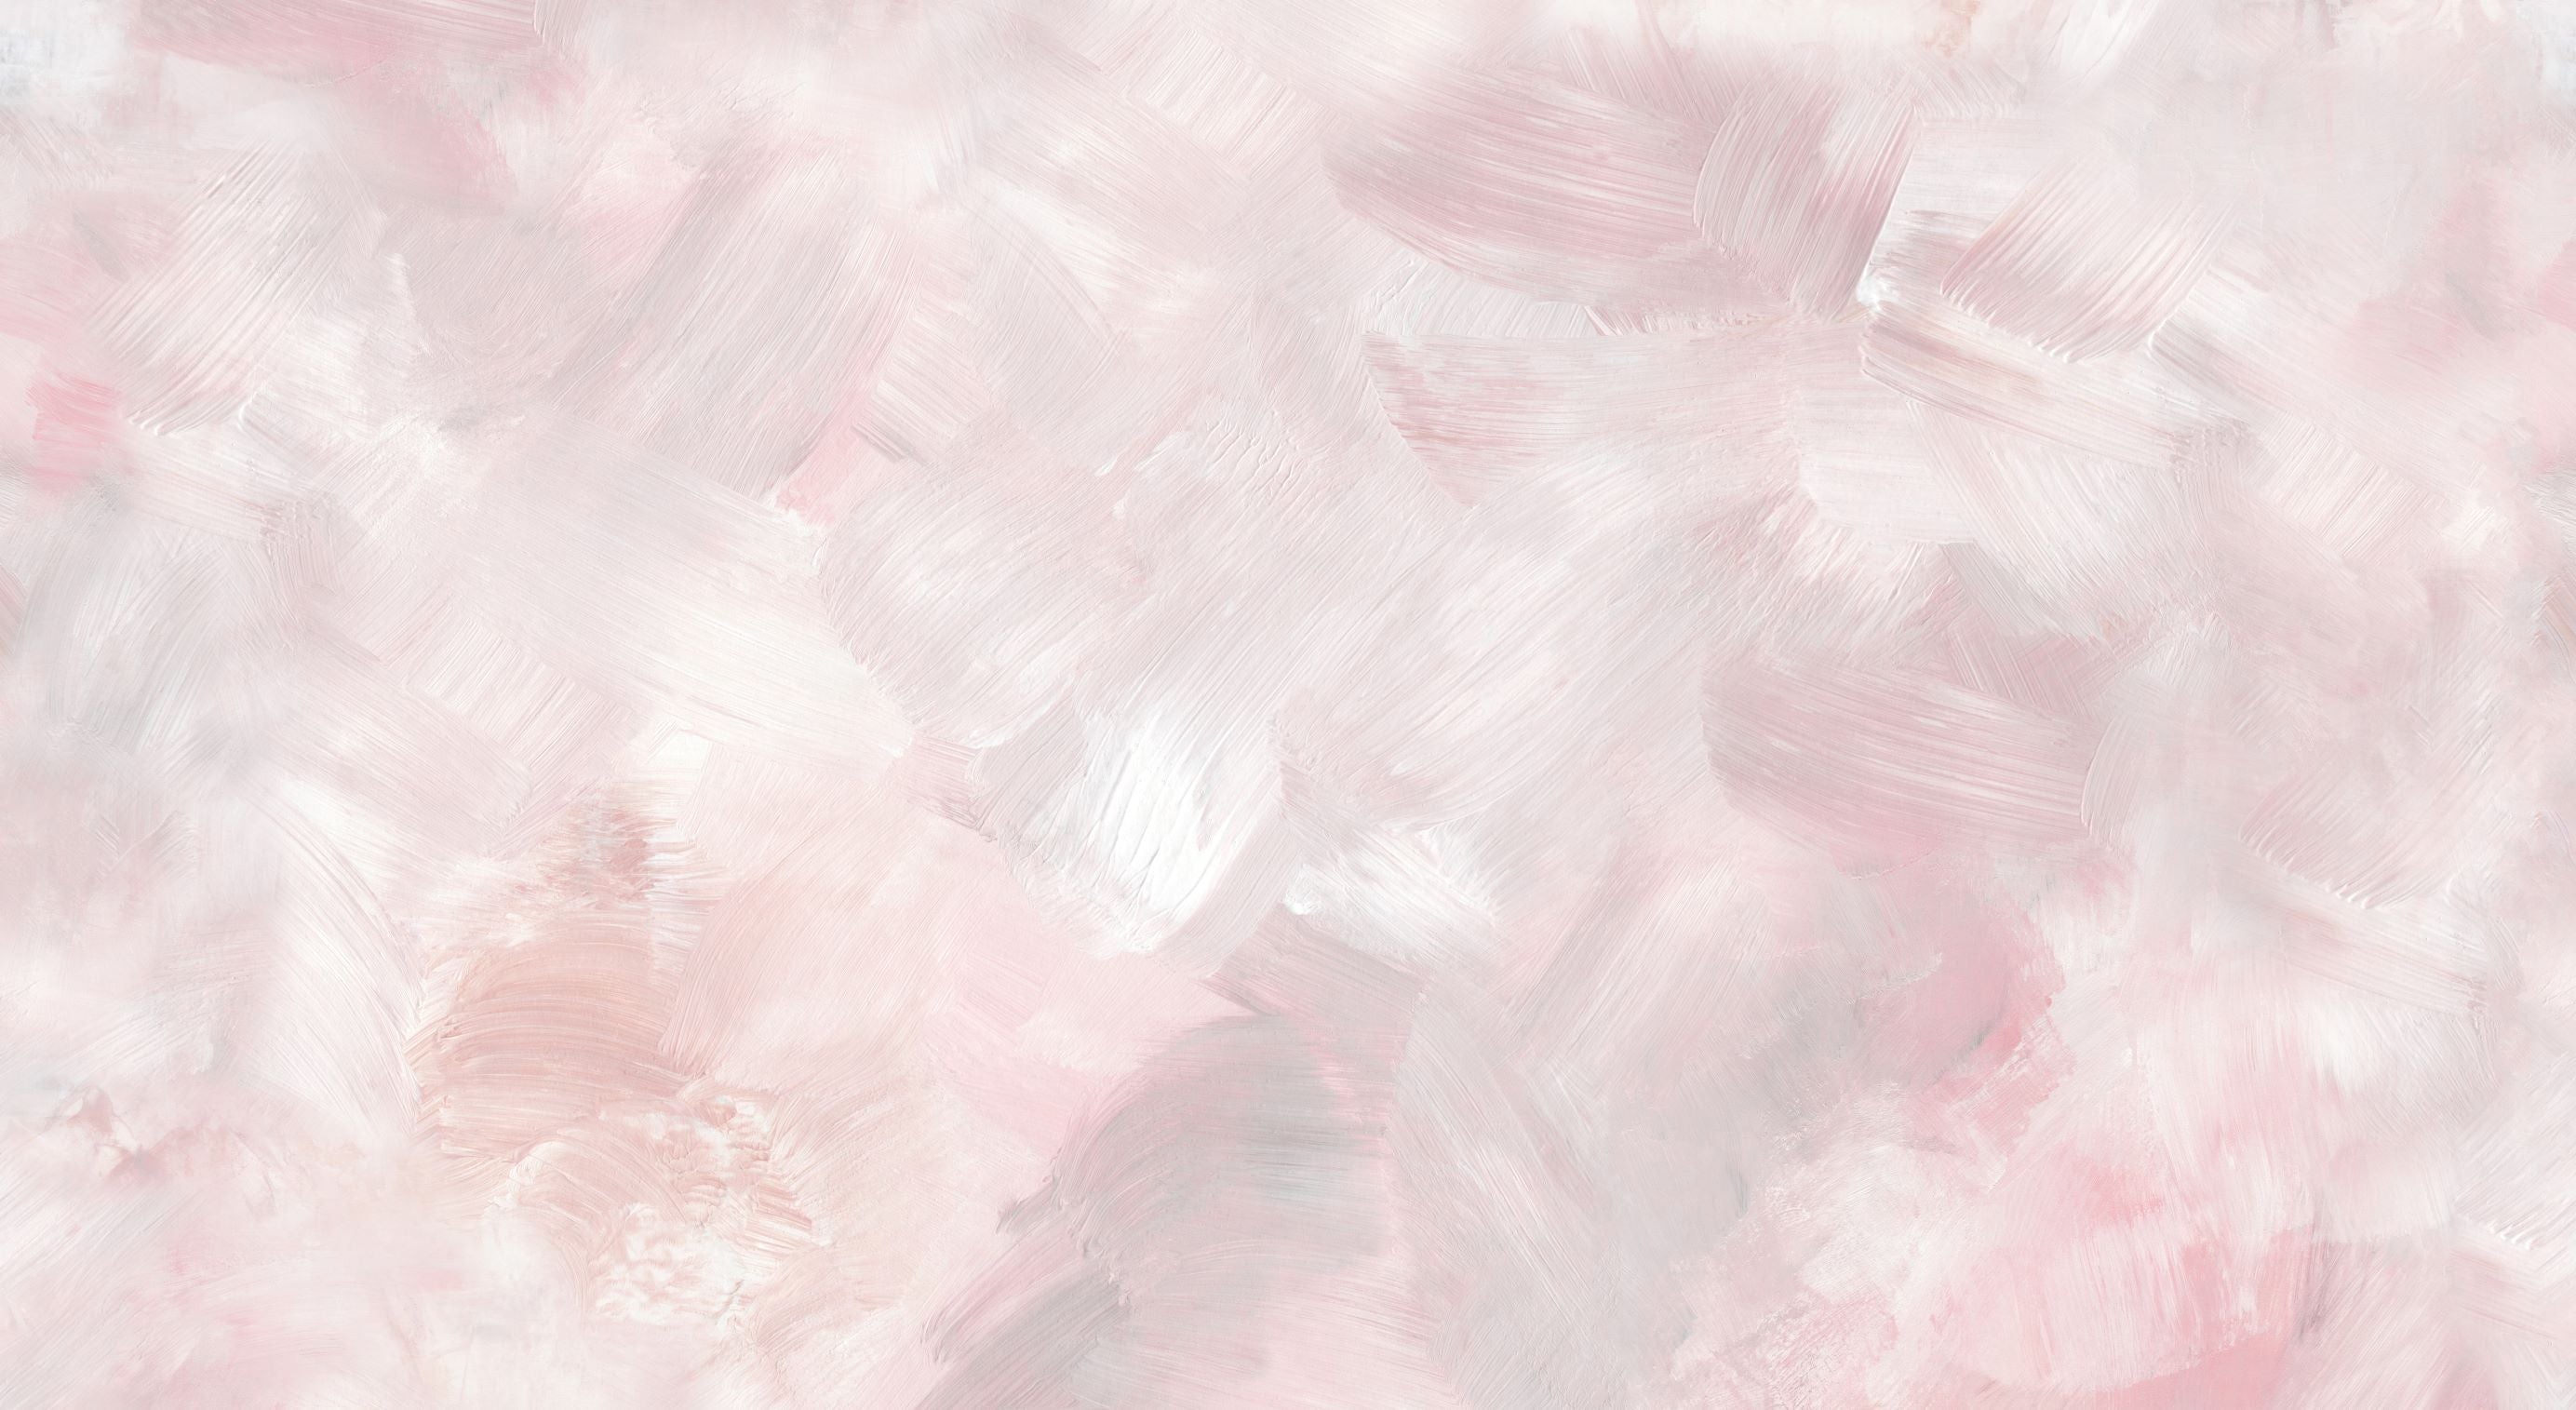 A painting of pink and white paint - Marble, blush, clean